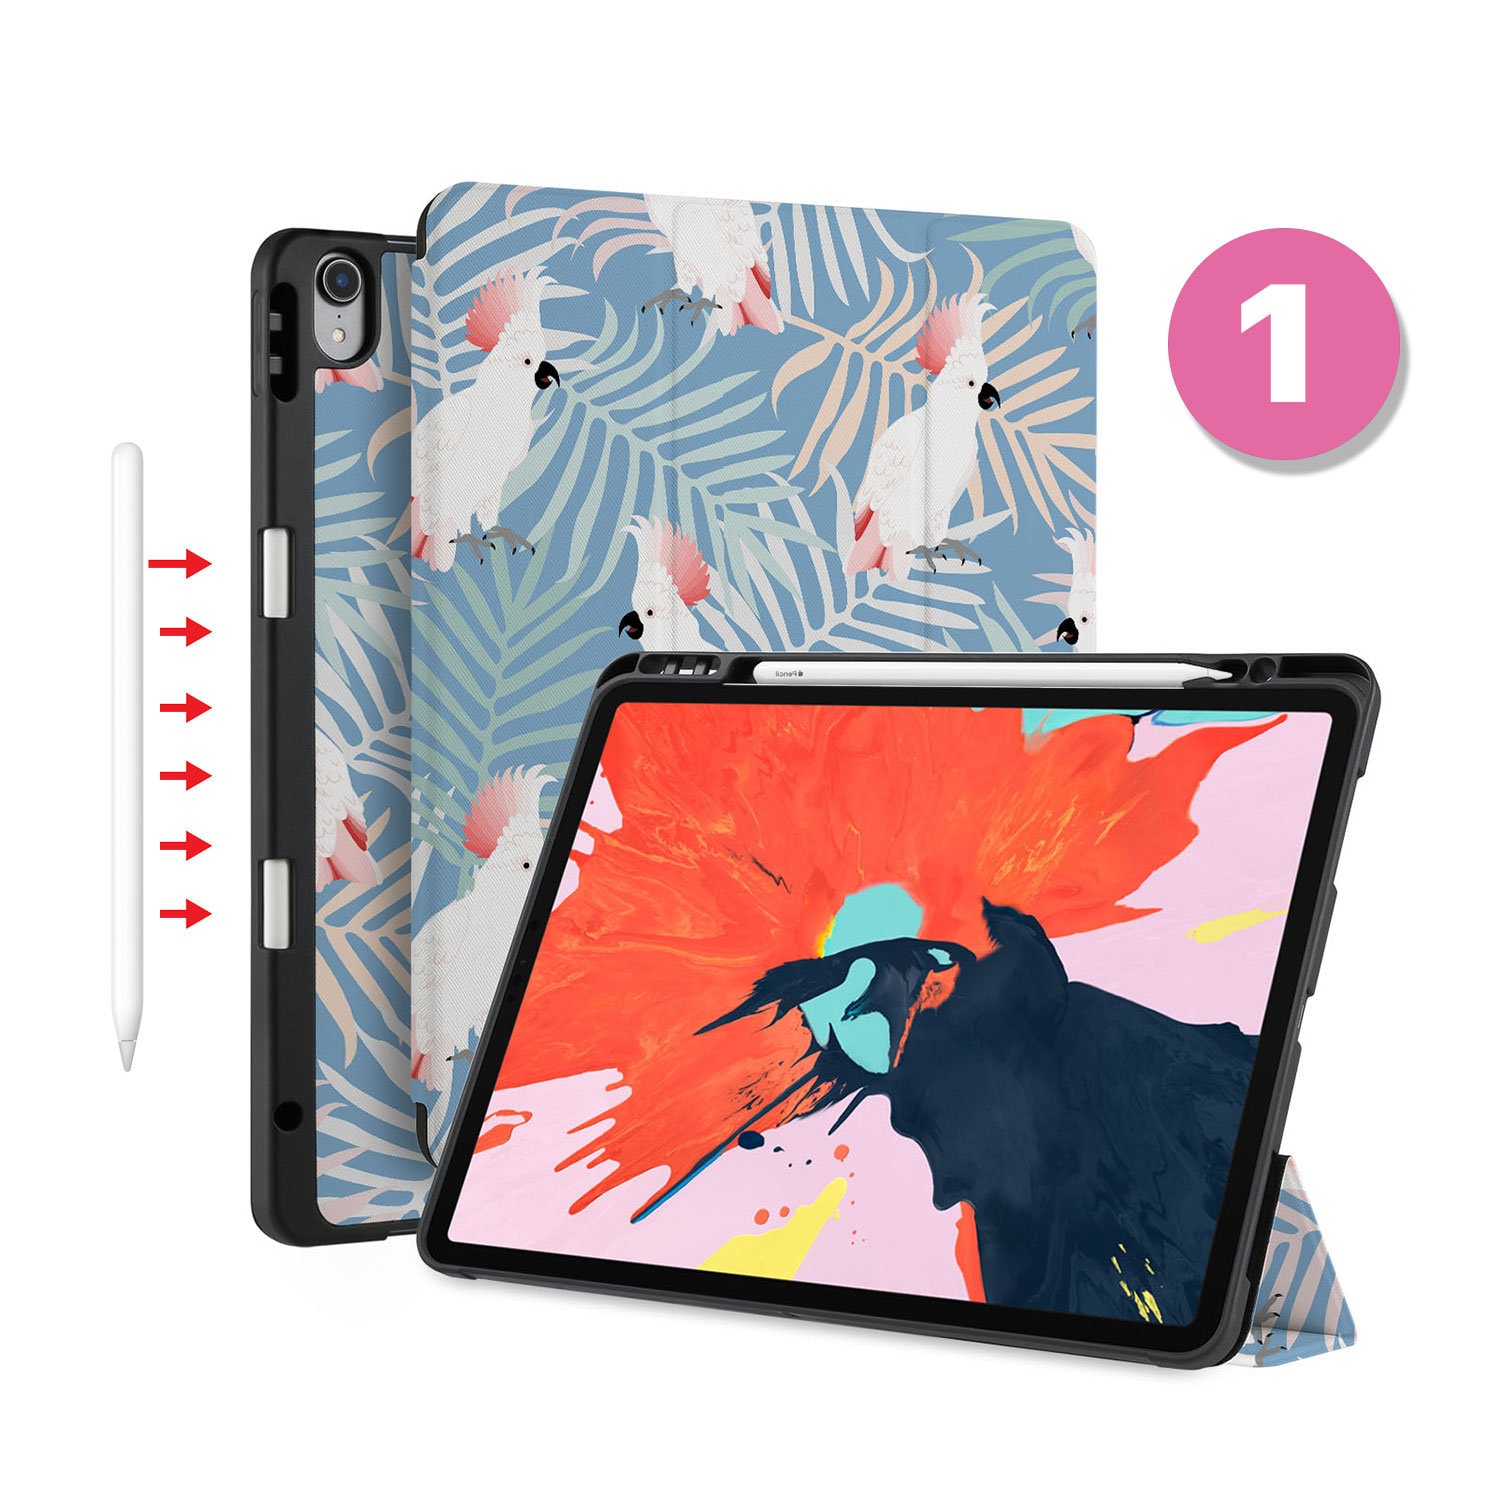 iPad 9th Generation Case, iPad Air 5th Generation Case, Retro Checkered  Colorful Print iPad Pro 11 Inch iPad Case 10.2 Case 10.9 Case with Pencil  Holder & Stand (TPU Leather) : Electronics 